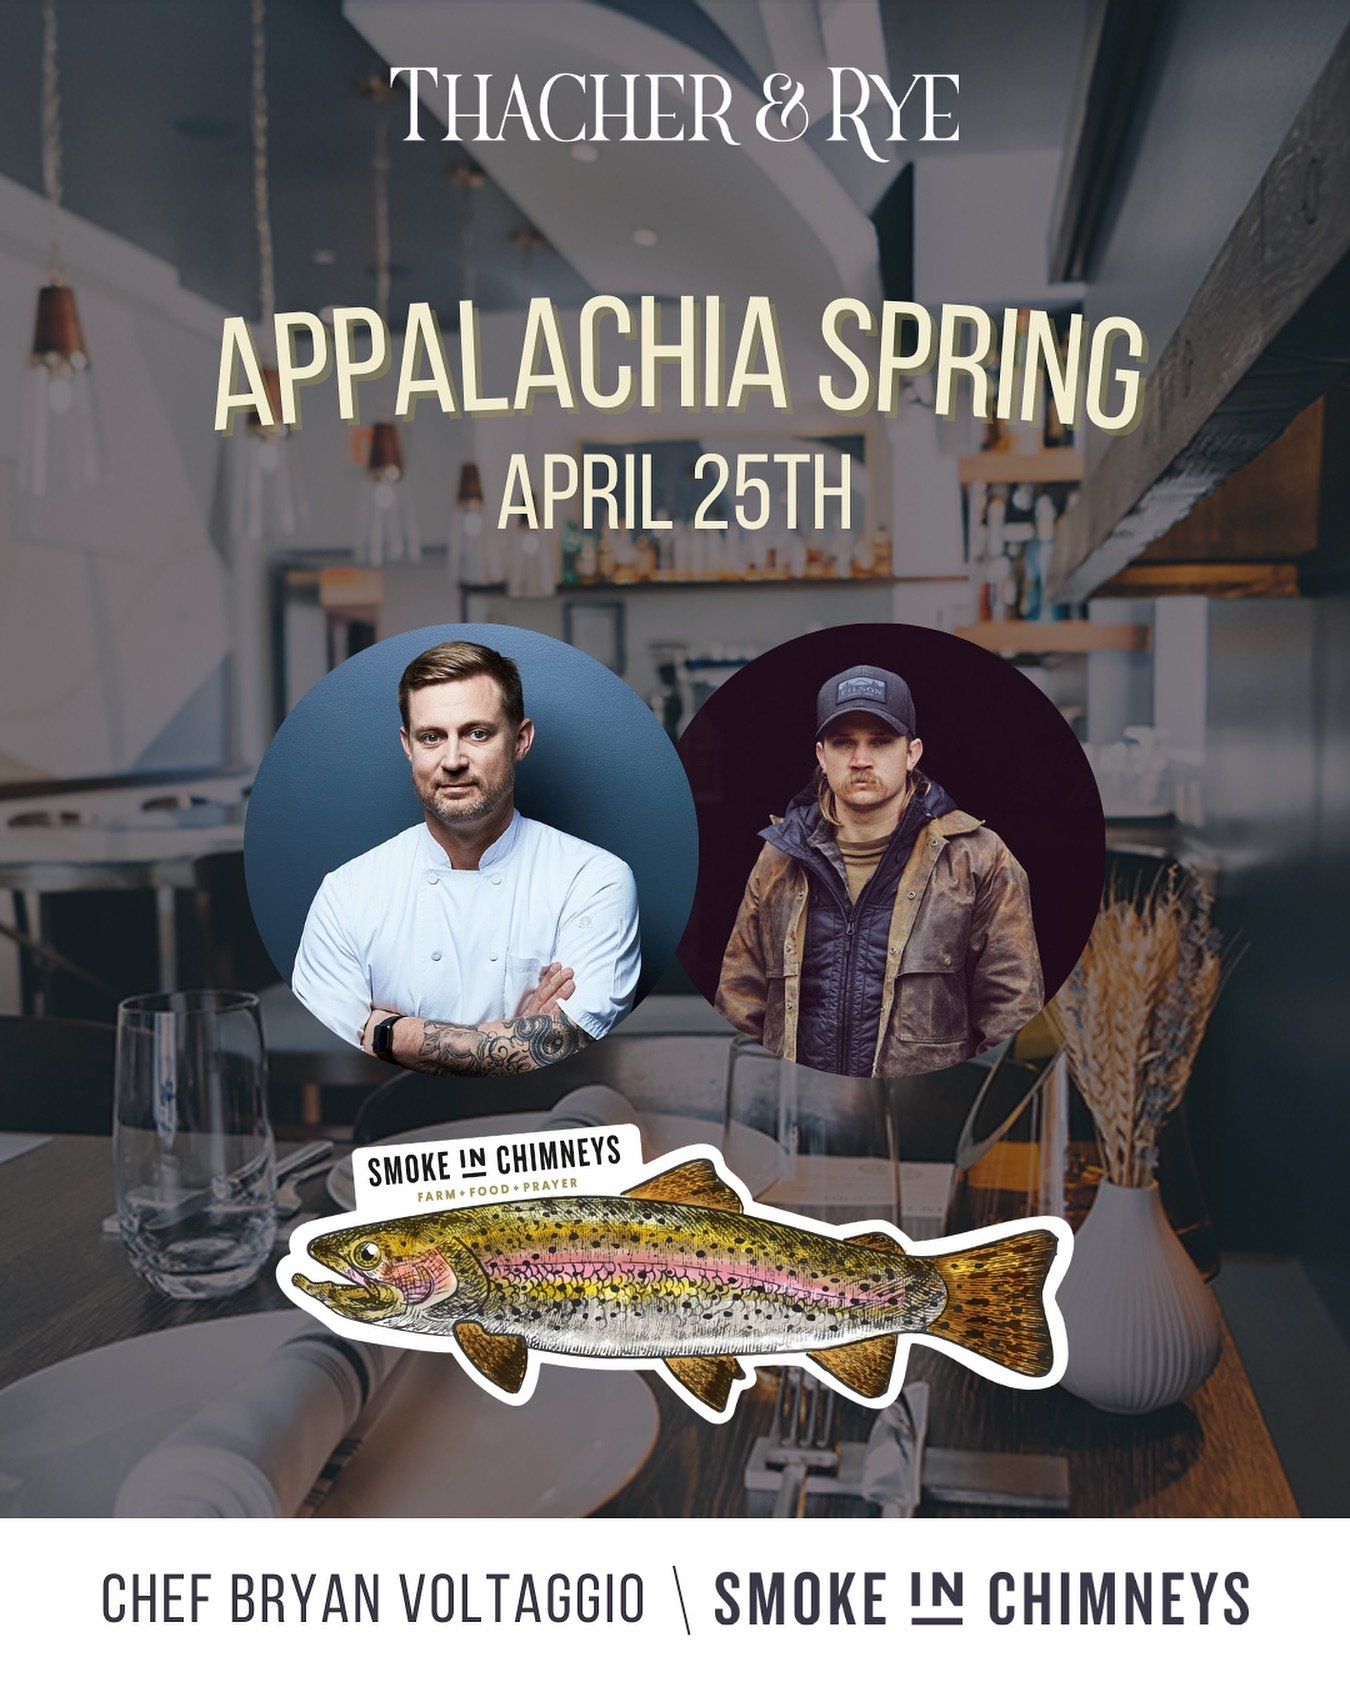 Join us on Thursday, April 25th at @thacherandrye for a special 4-course menu! 🍽️

Menu crafted by @bryanvoltaggio using ingredients sourced by @smokeinchimneys that highlight the Appalachian Spring. 🌿

Follow the link in our bio to book your reser